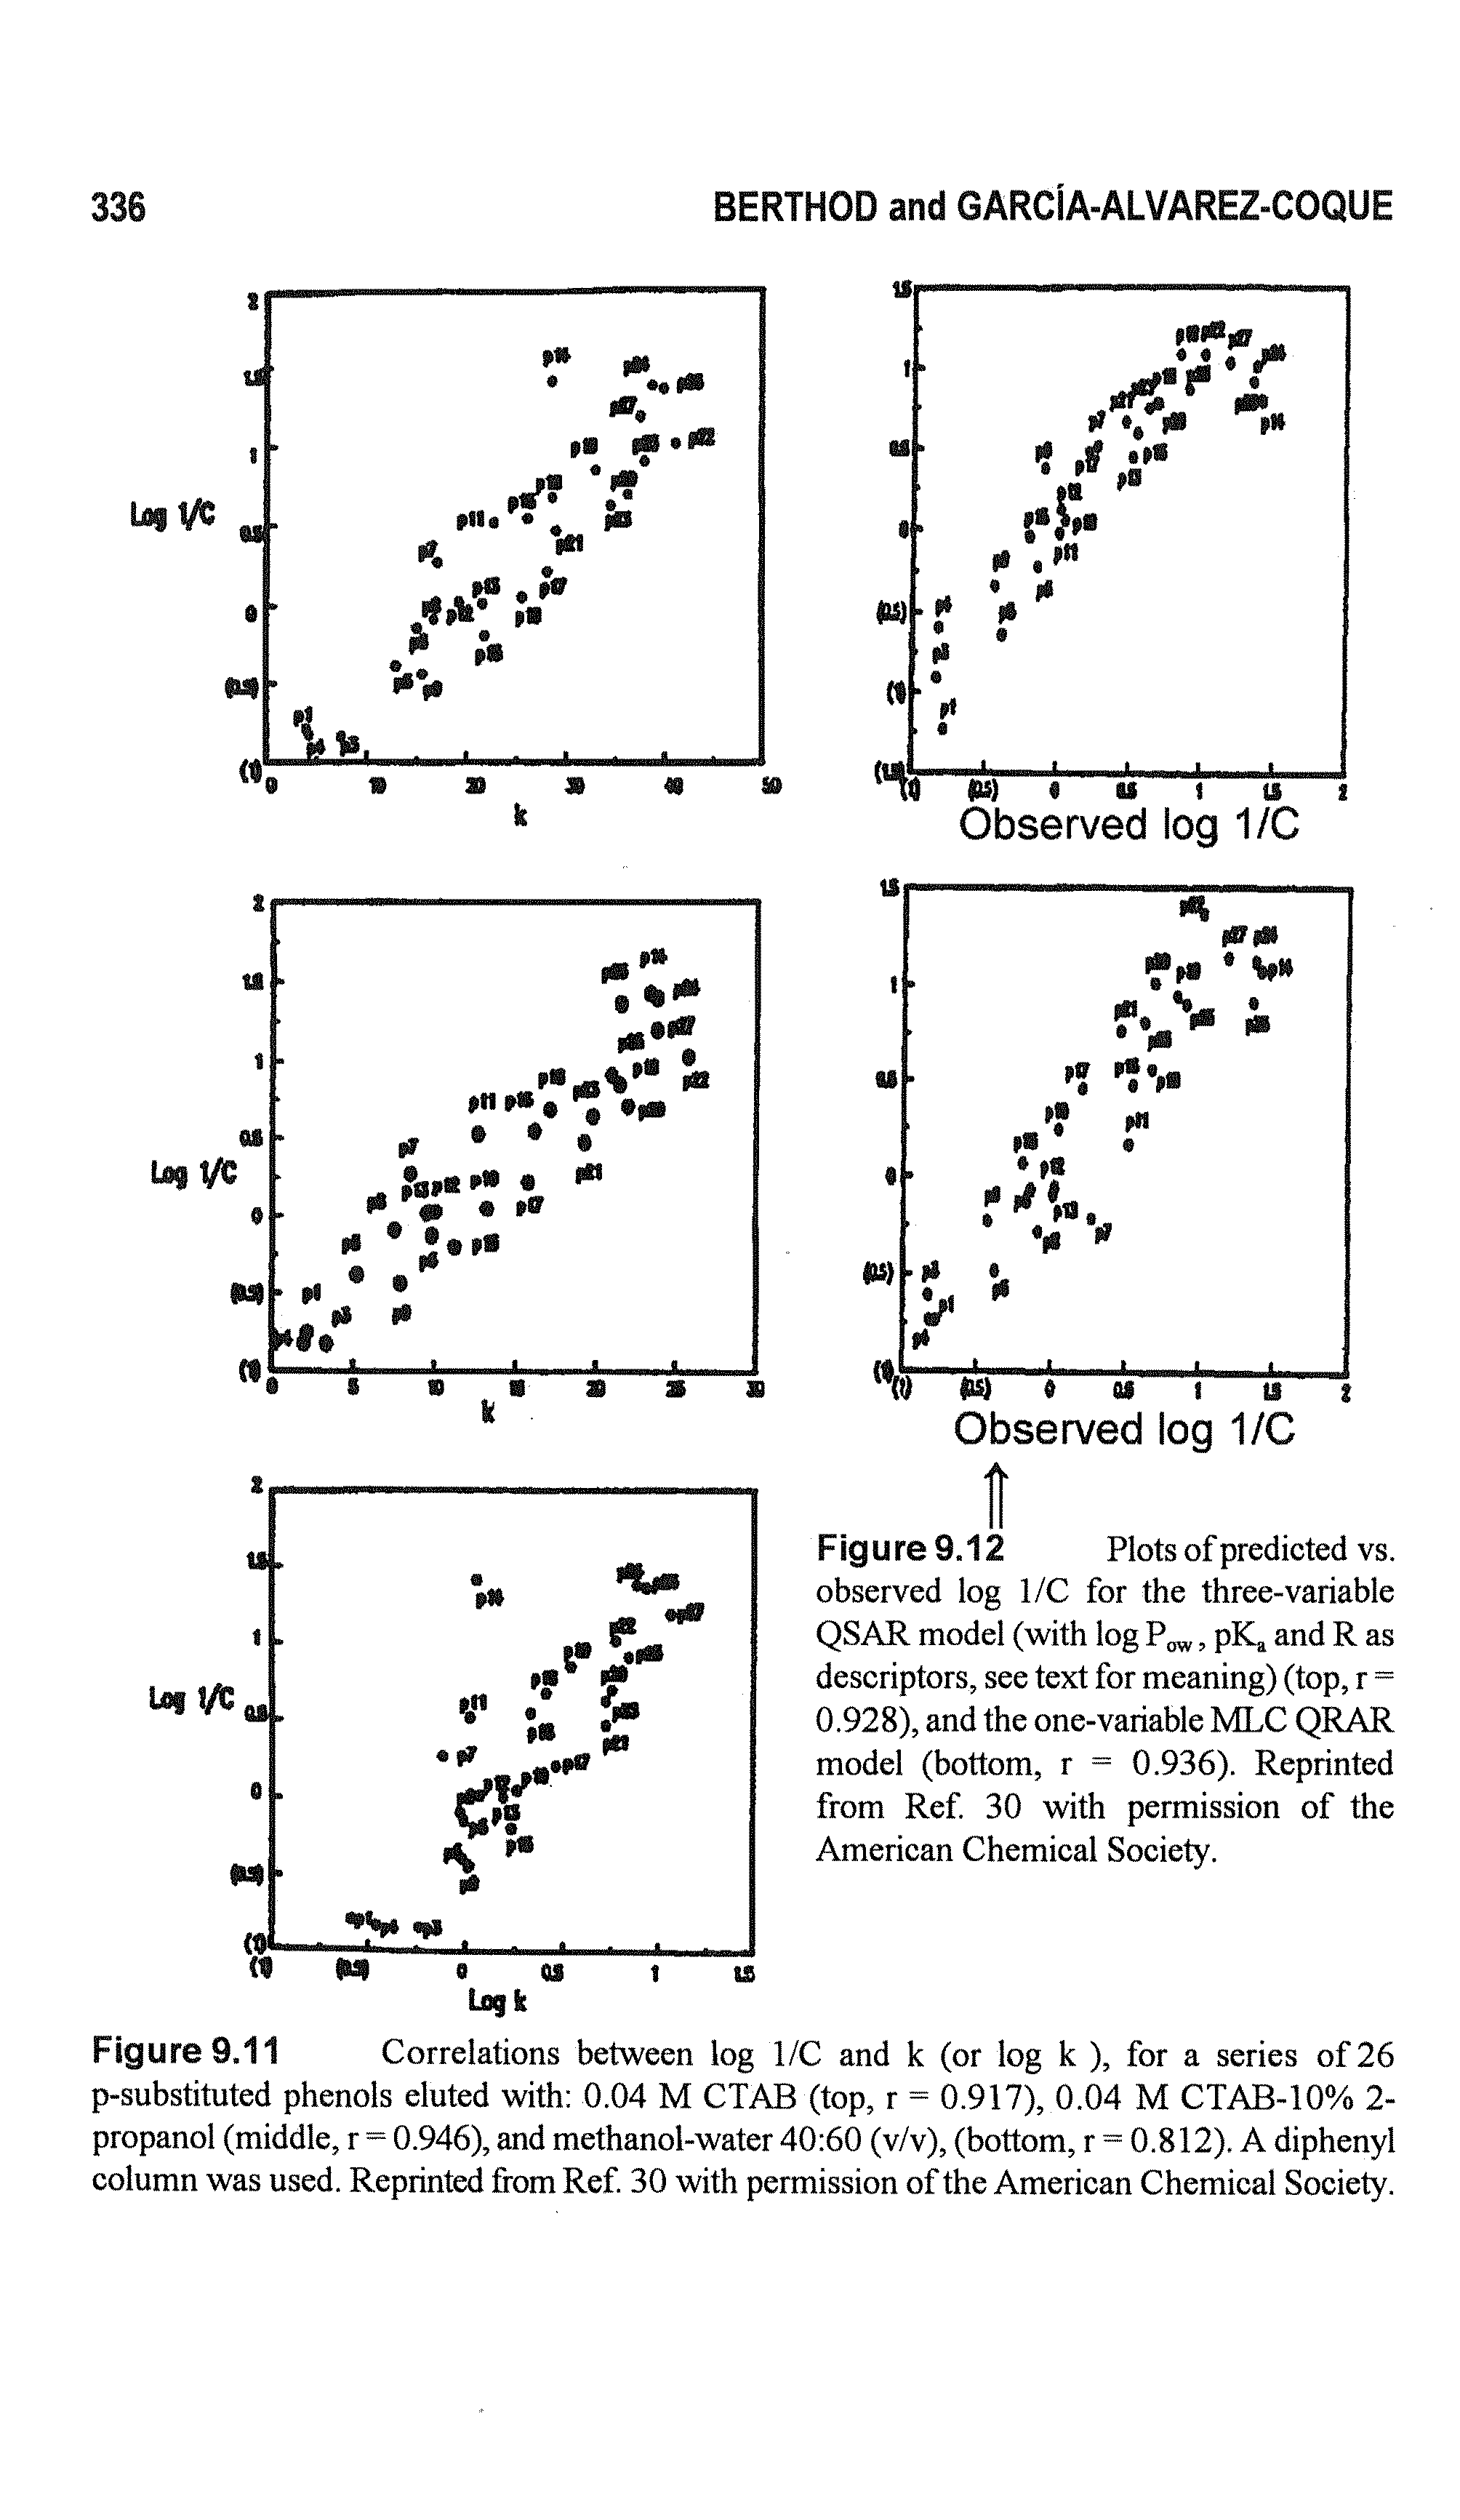 Figure 9.11 Correlations between log 1/C and k (or log k ), for a series of 26 p-substituted phenols eluted with 0.04 M CTAB (top, r = 0.917), 0.04 M CTAB-10% 2-propanol (middle, r = 0.946), and methanol-water 40 60 (v/v), (bottom, r = 0.812). A diphenyl column was used. Reprinted from Ref 30 with permission of the American Chemical Society.